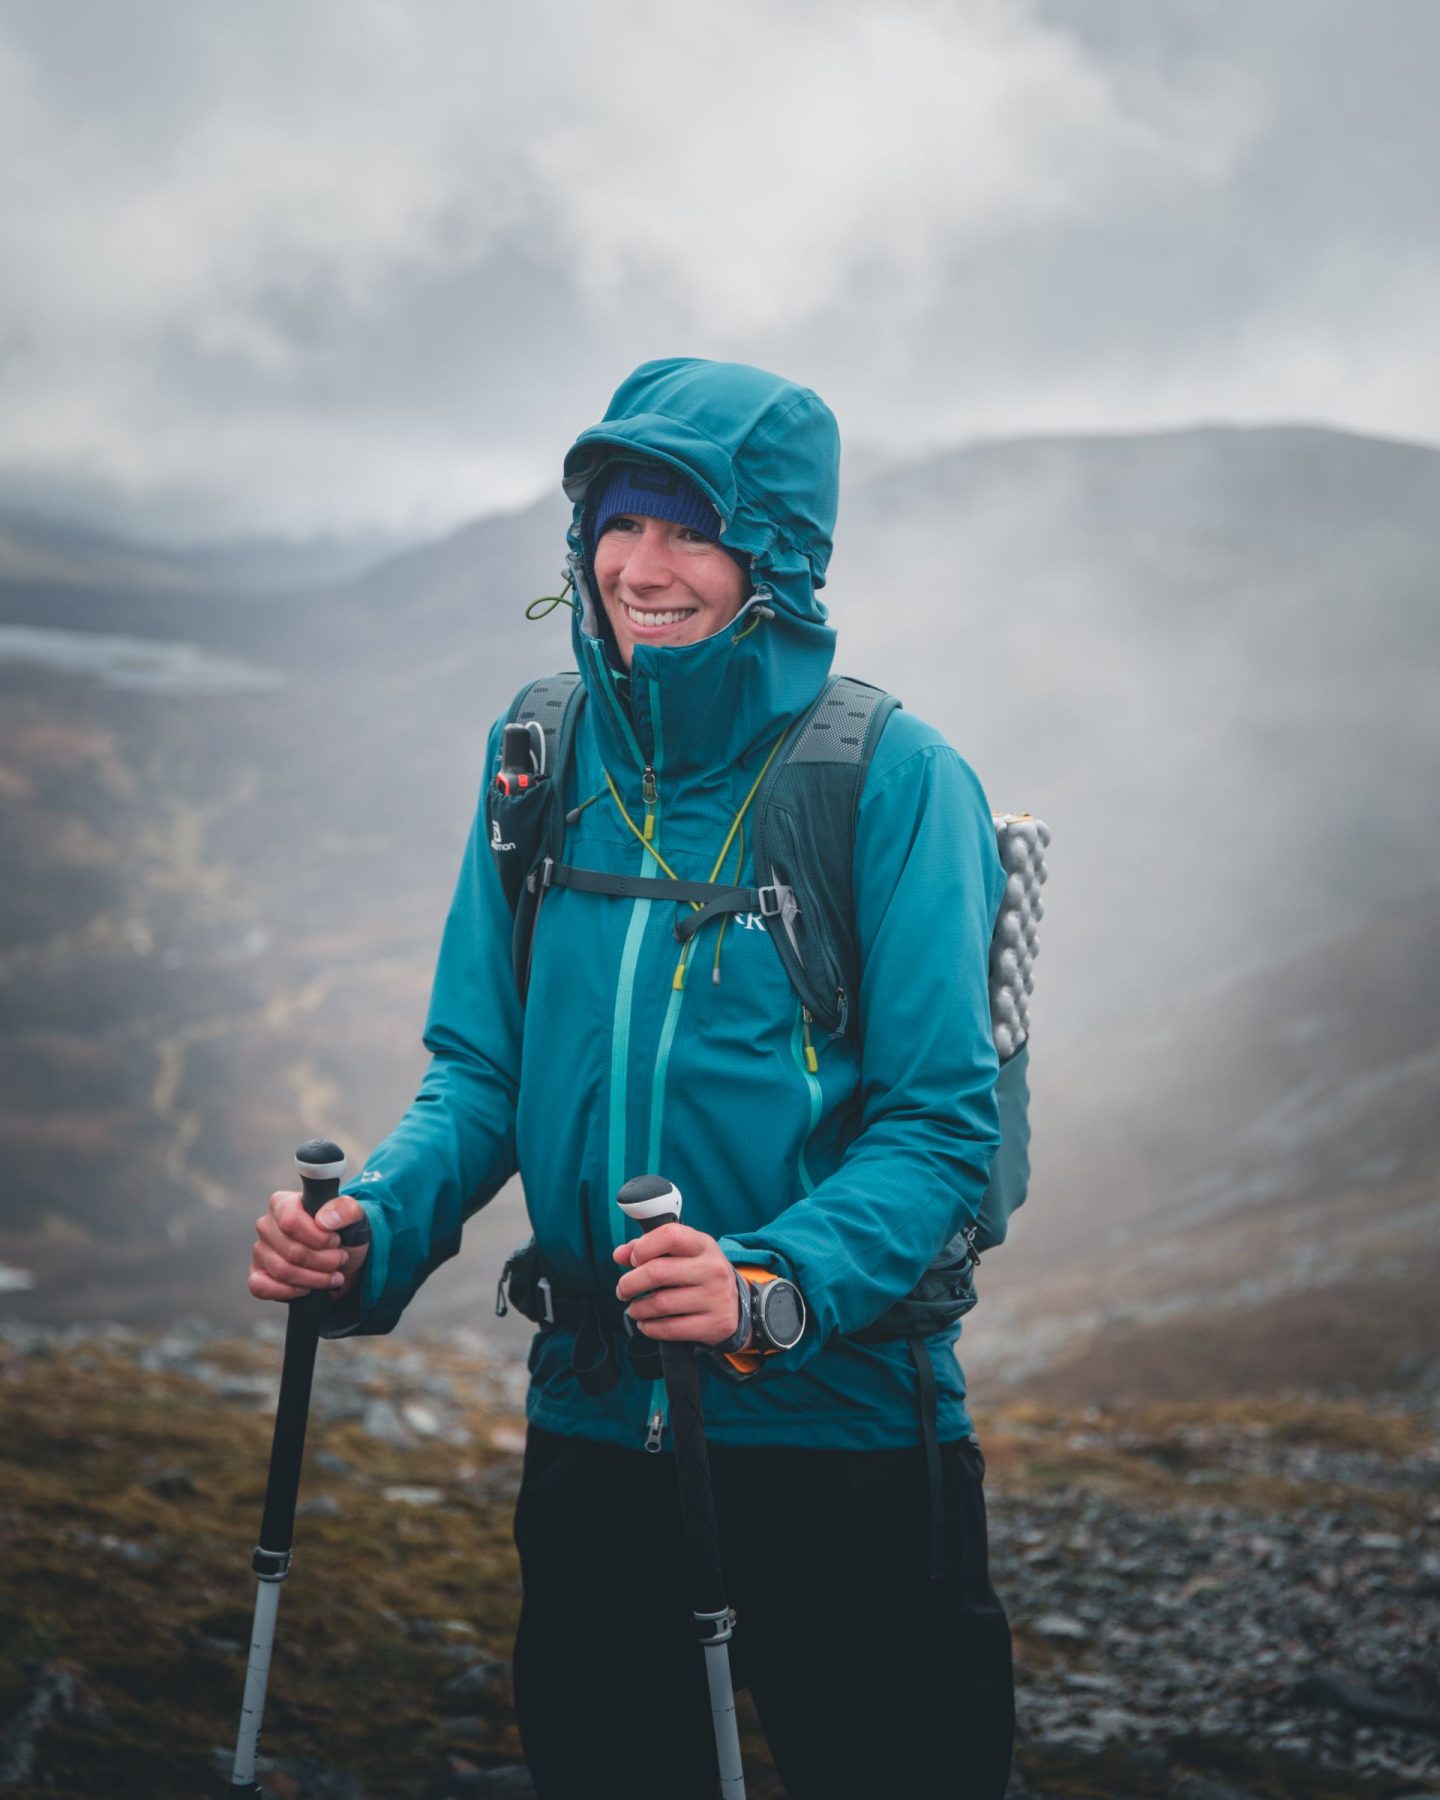 Image of adventurer Nic hiking in the snow, image taken by Edward Fitzpatrick.